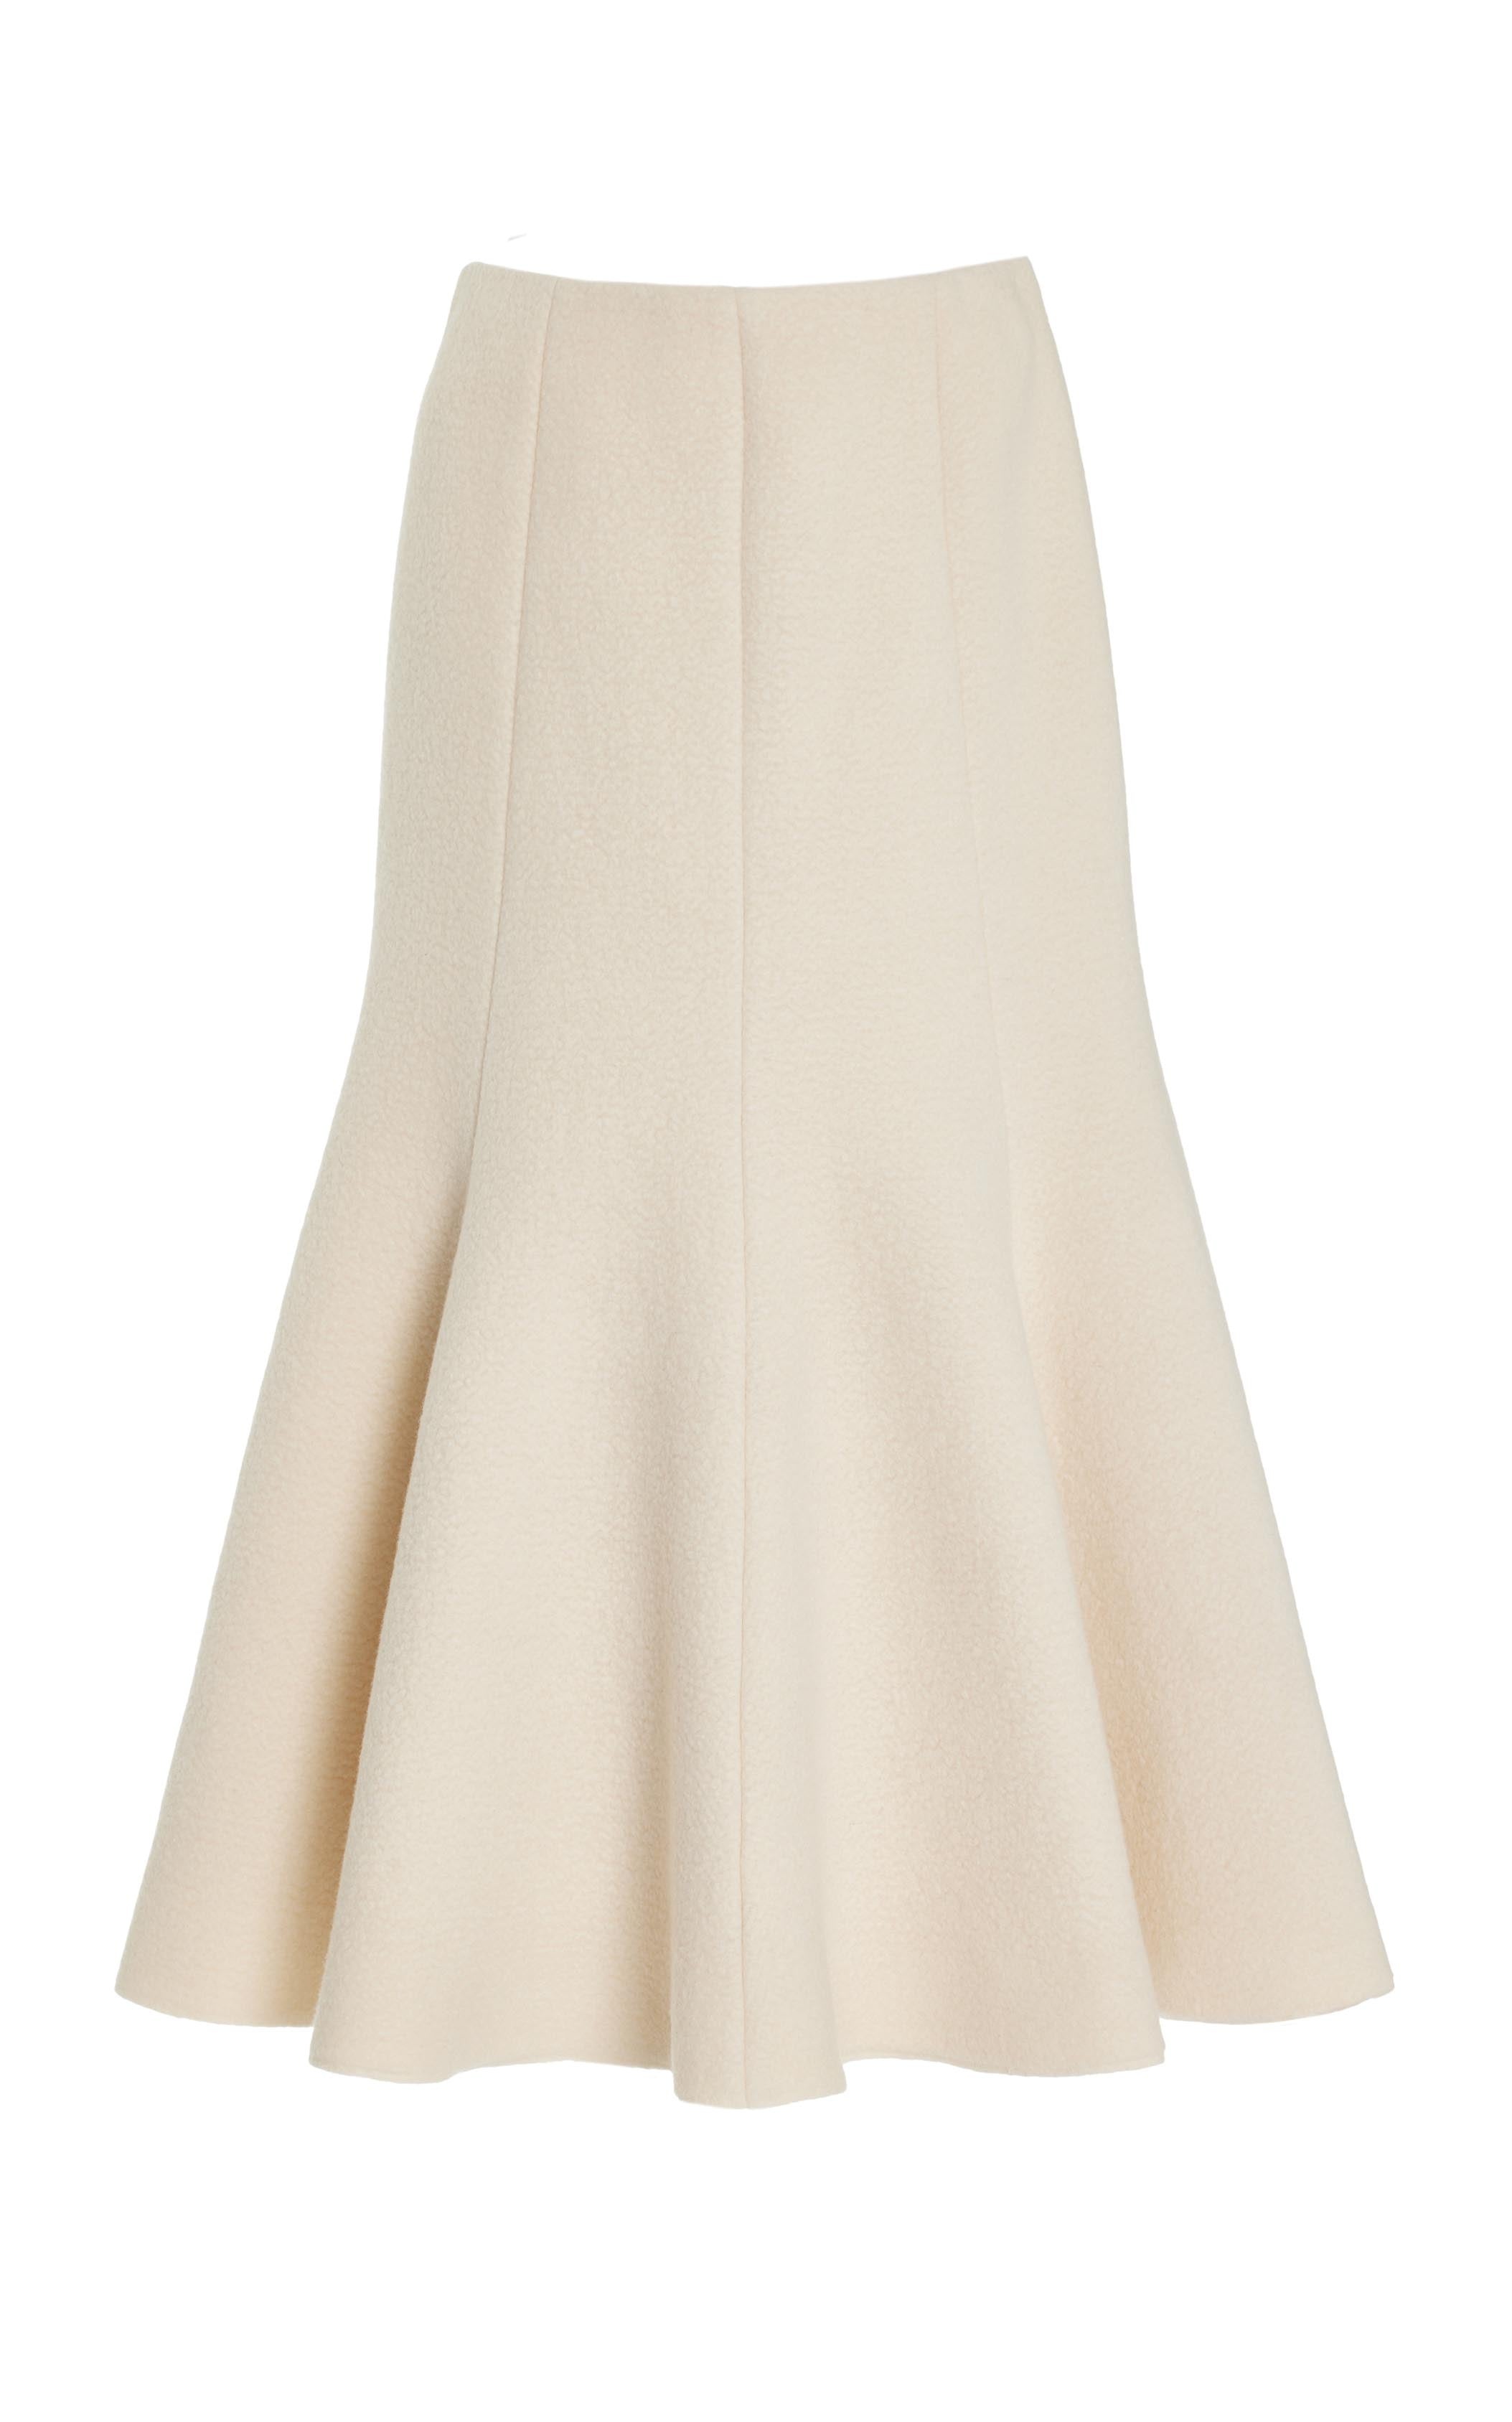 Amy Skirt in Recycled Cashmere Felt - 1